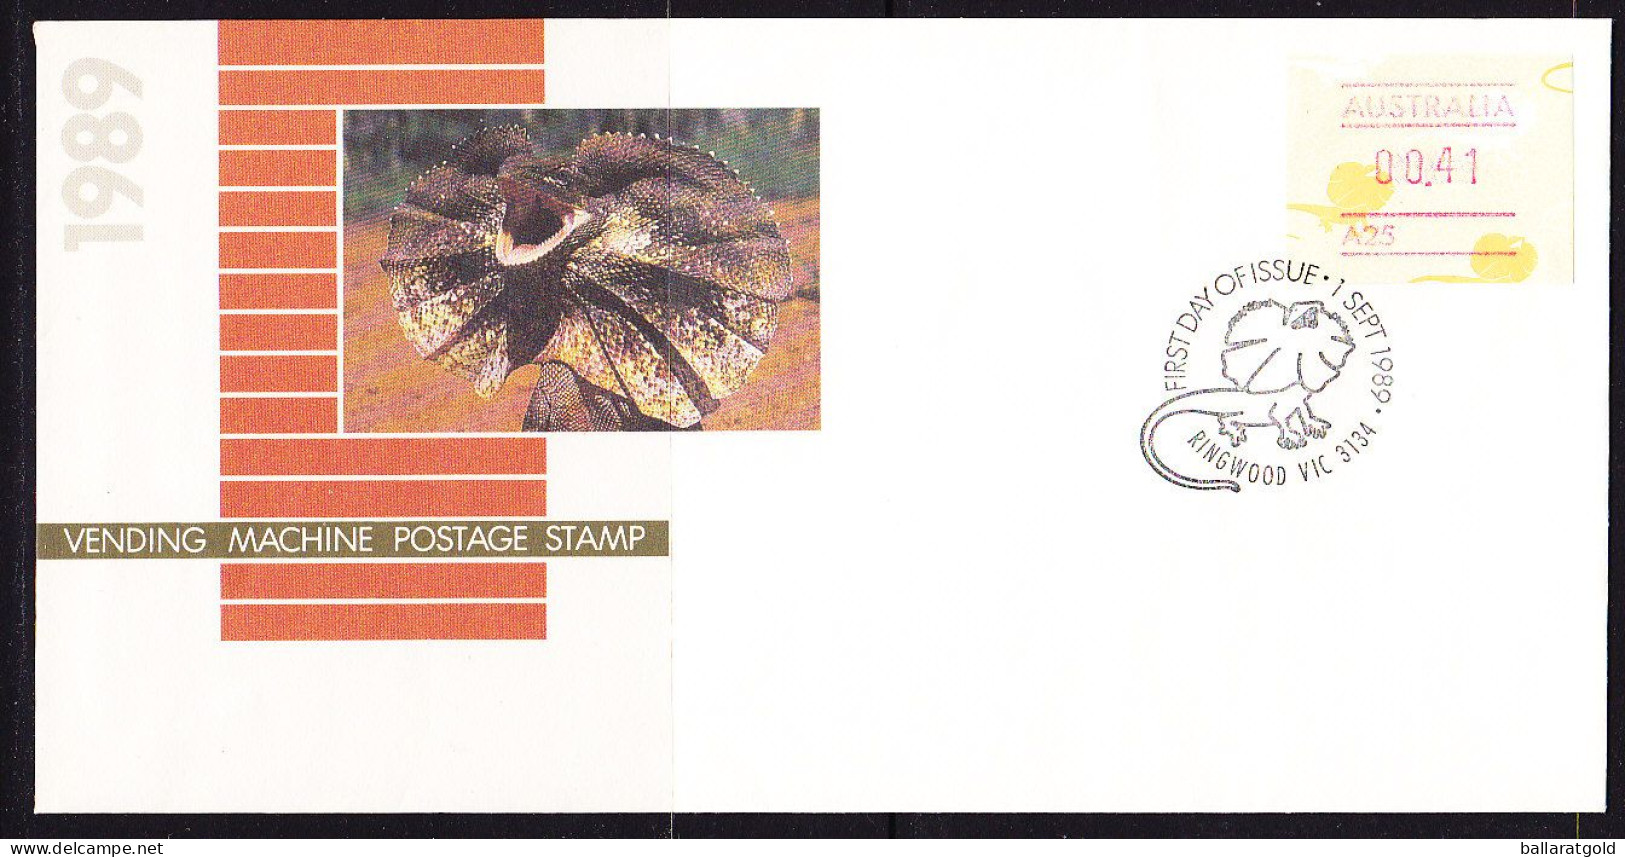 Australia 1989 Frilled Neck Lizard Frama APM21580 First Day Cover - Covers & Documents